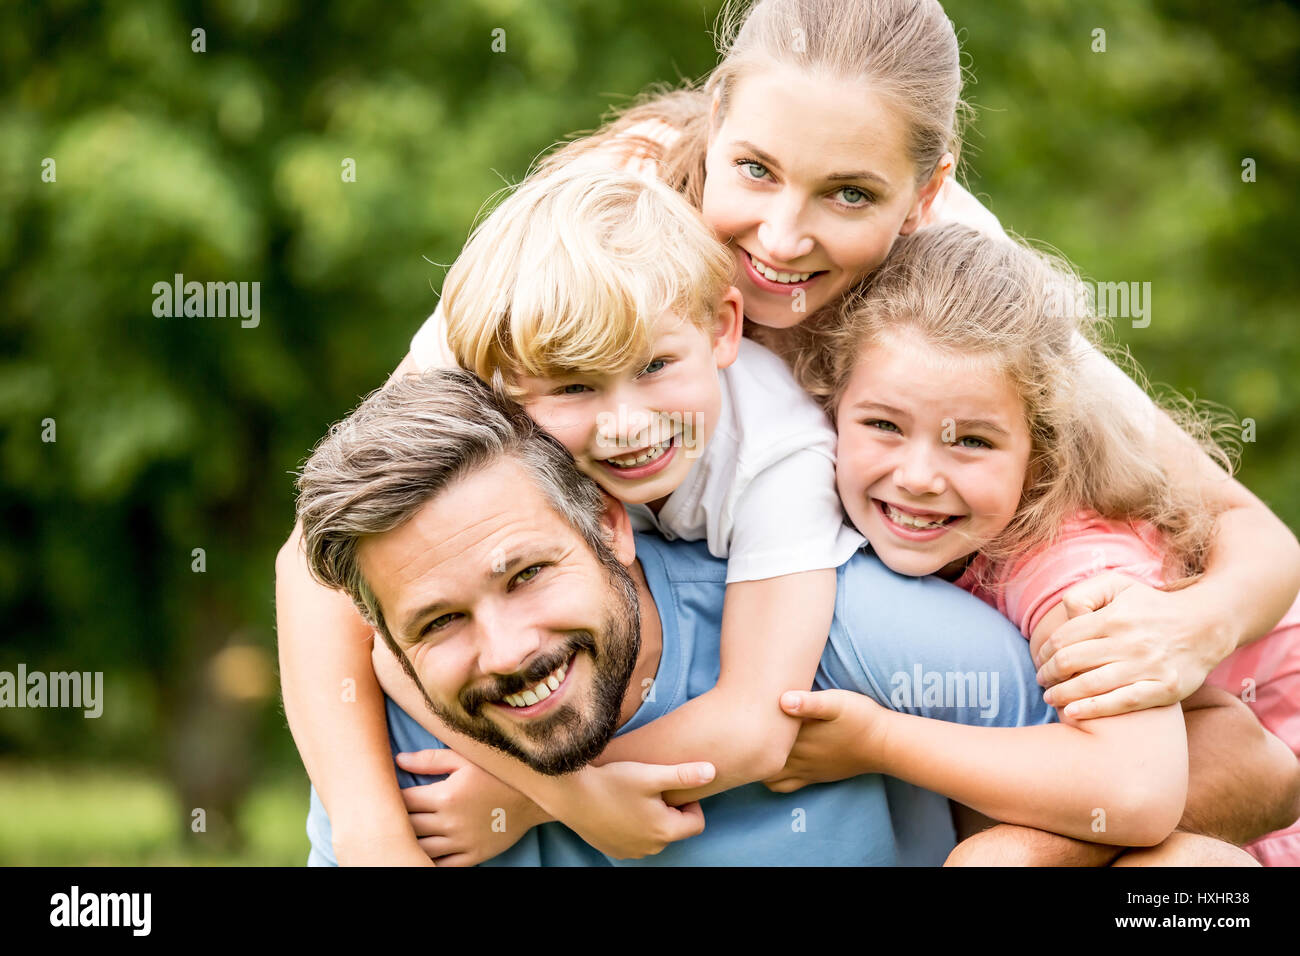 Happy family with two kids hugging together in harmony in garden Stock Photo